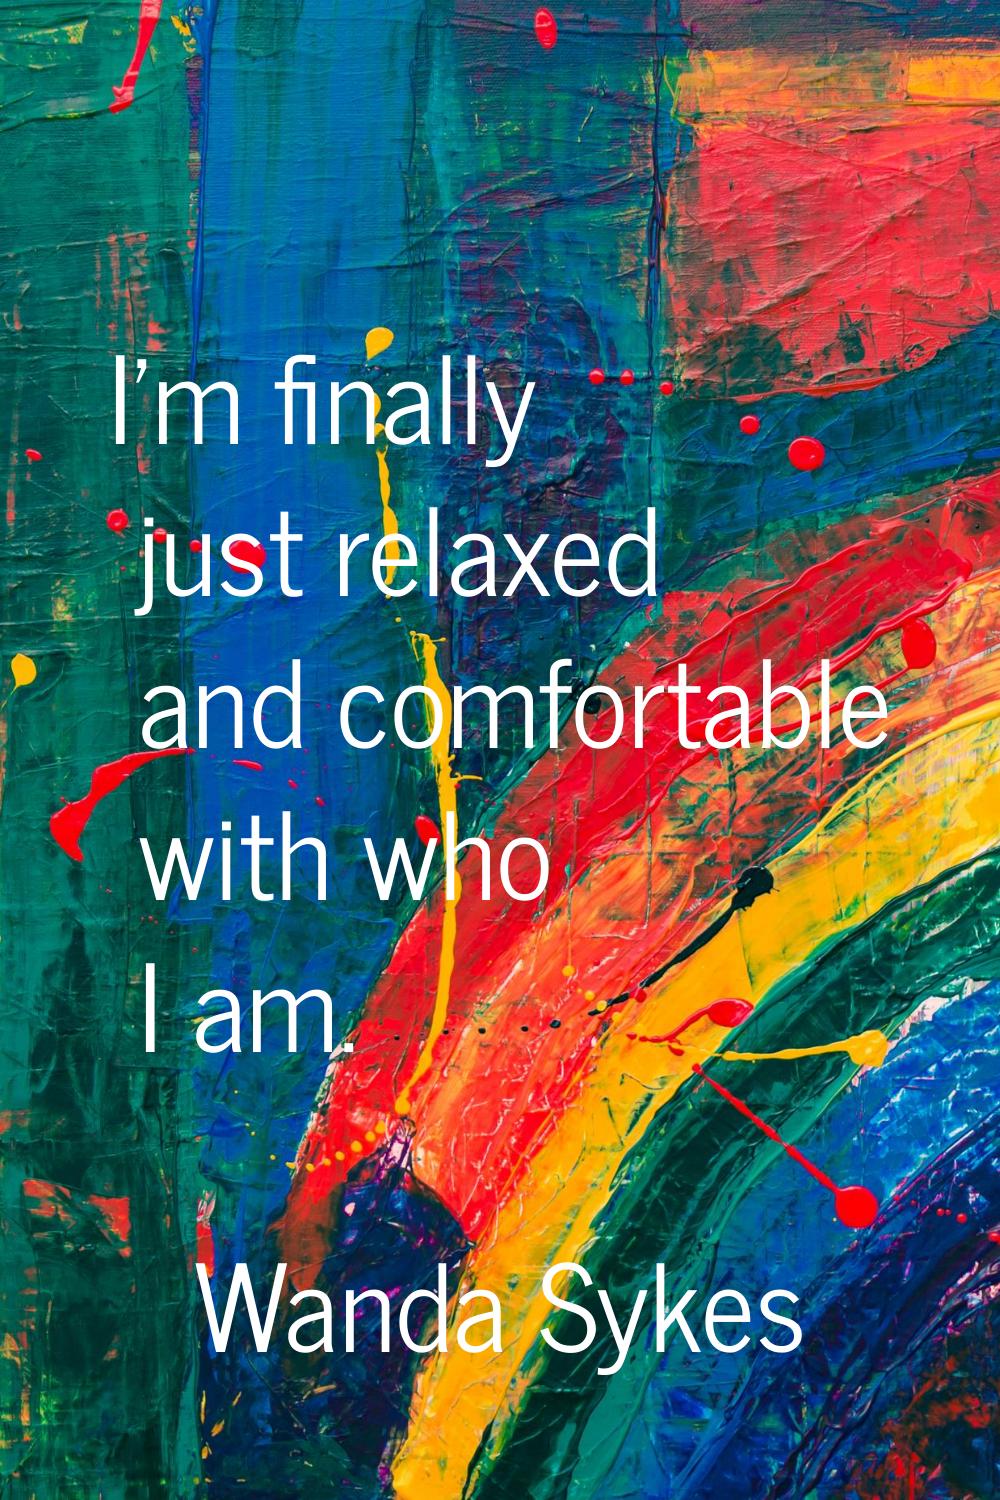 I'm finally just relaxed and comfortable with who I am.